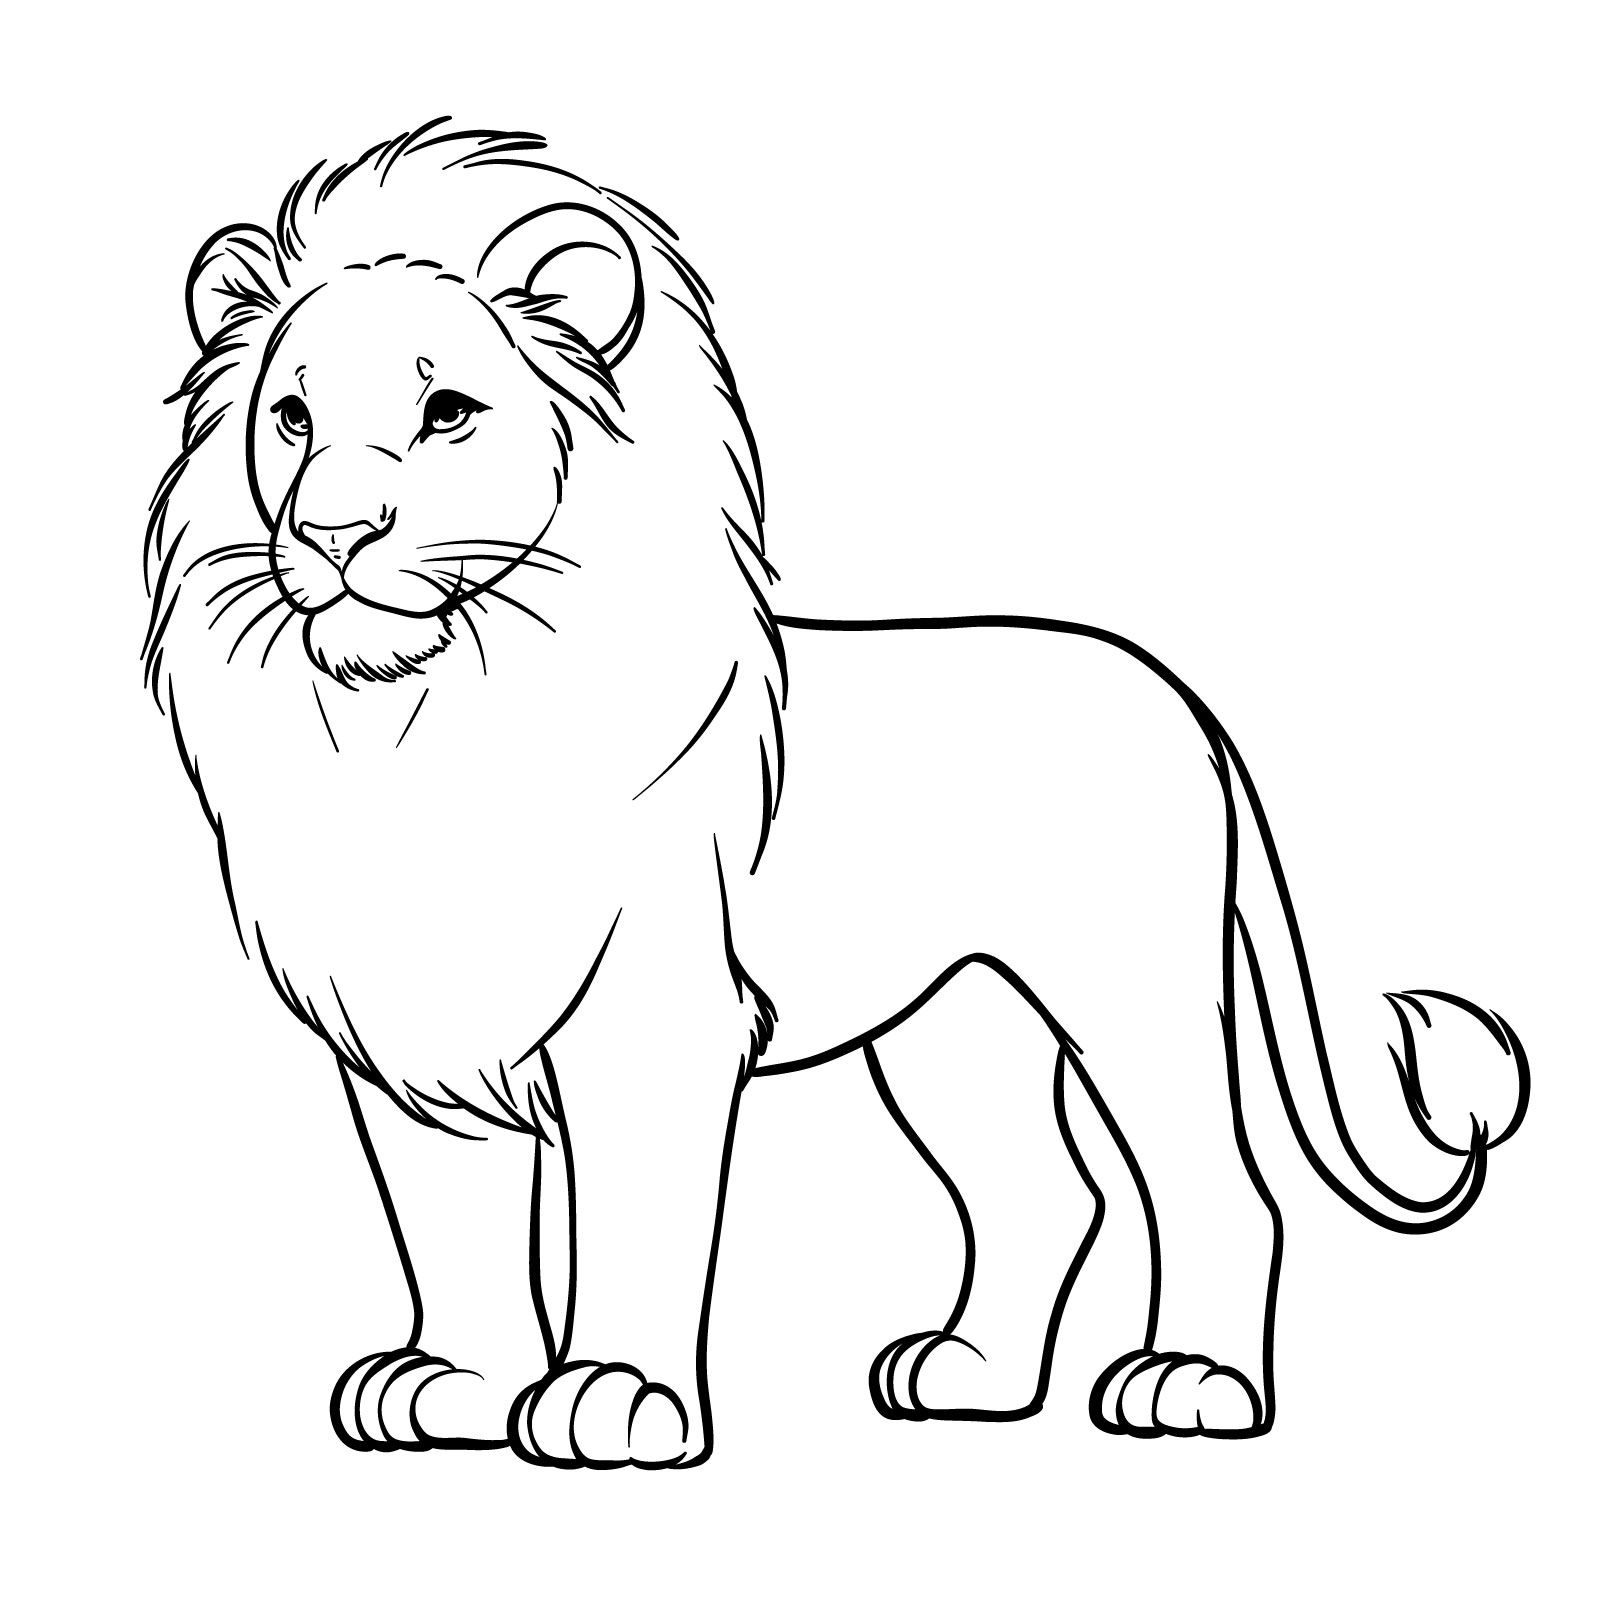 Learn how to draw a simplified realistic lion - the result